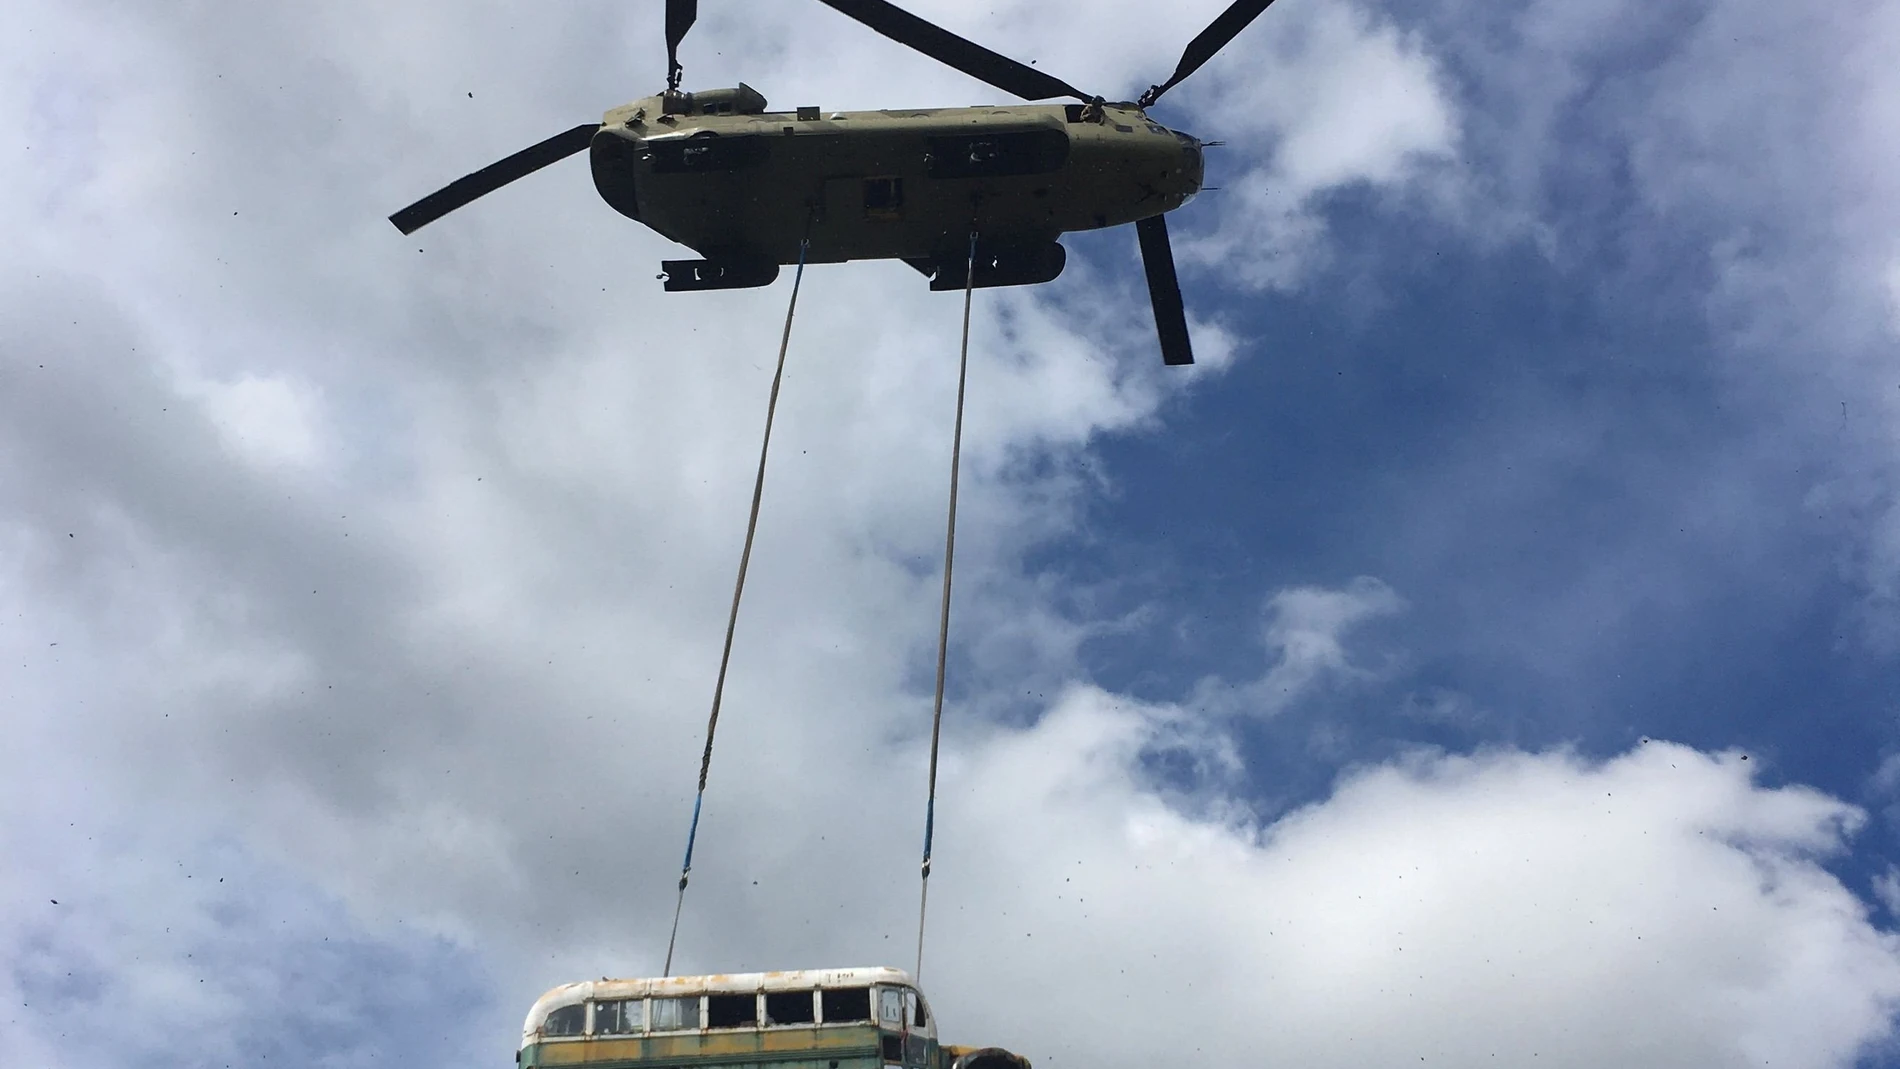 laska Army National Guard CH-47 Chinook helicopter carries the bus made famous by the "Into the Wild" book and movie near Stampede Trail